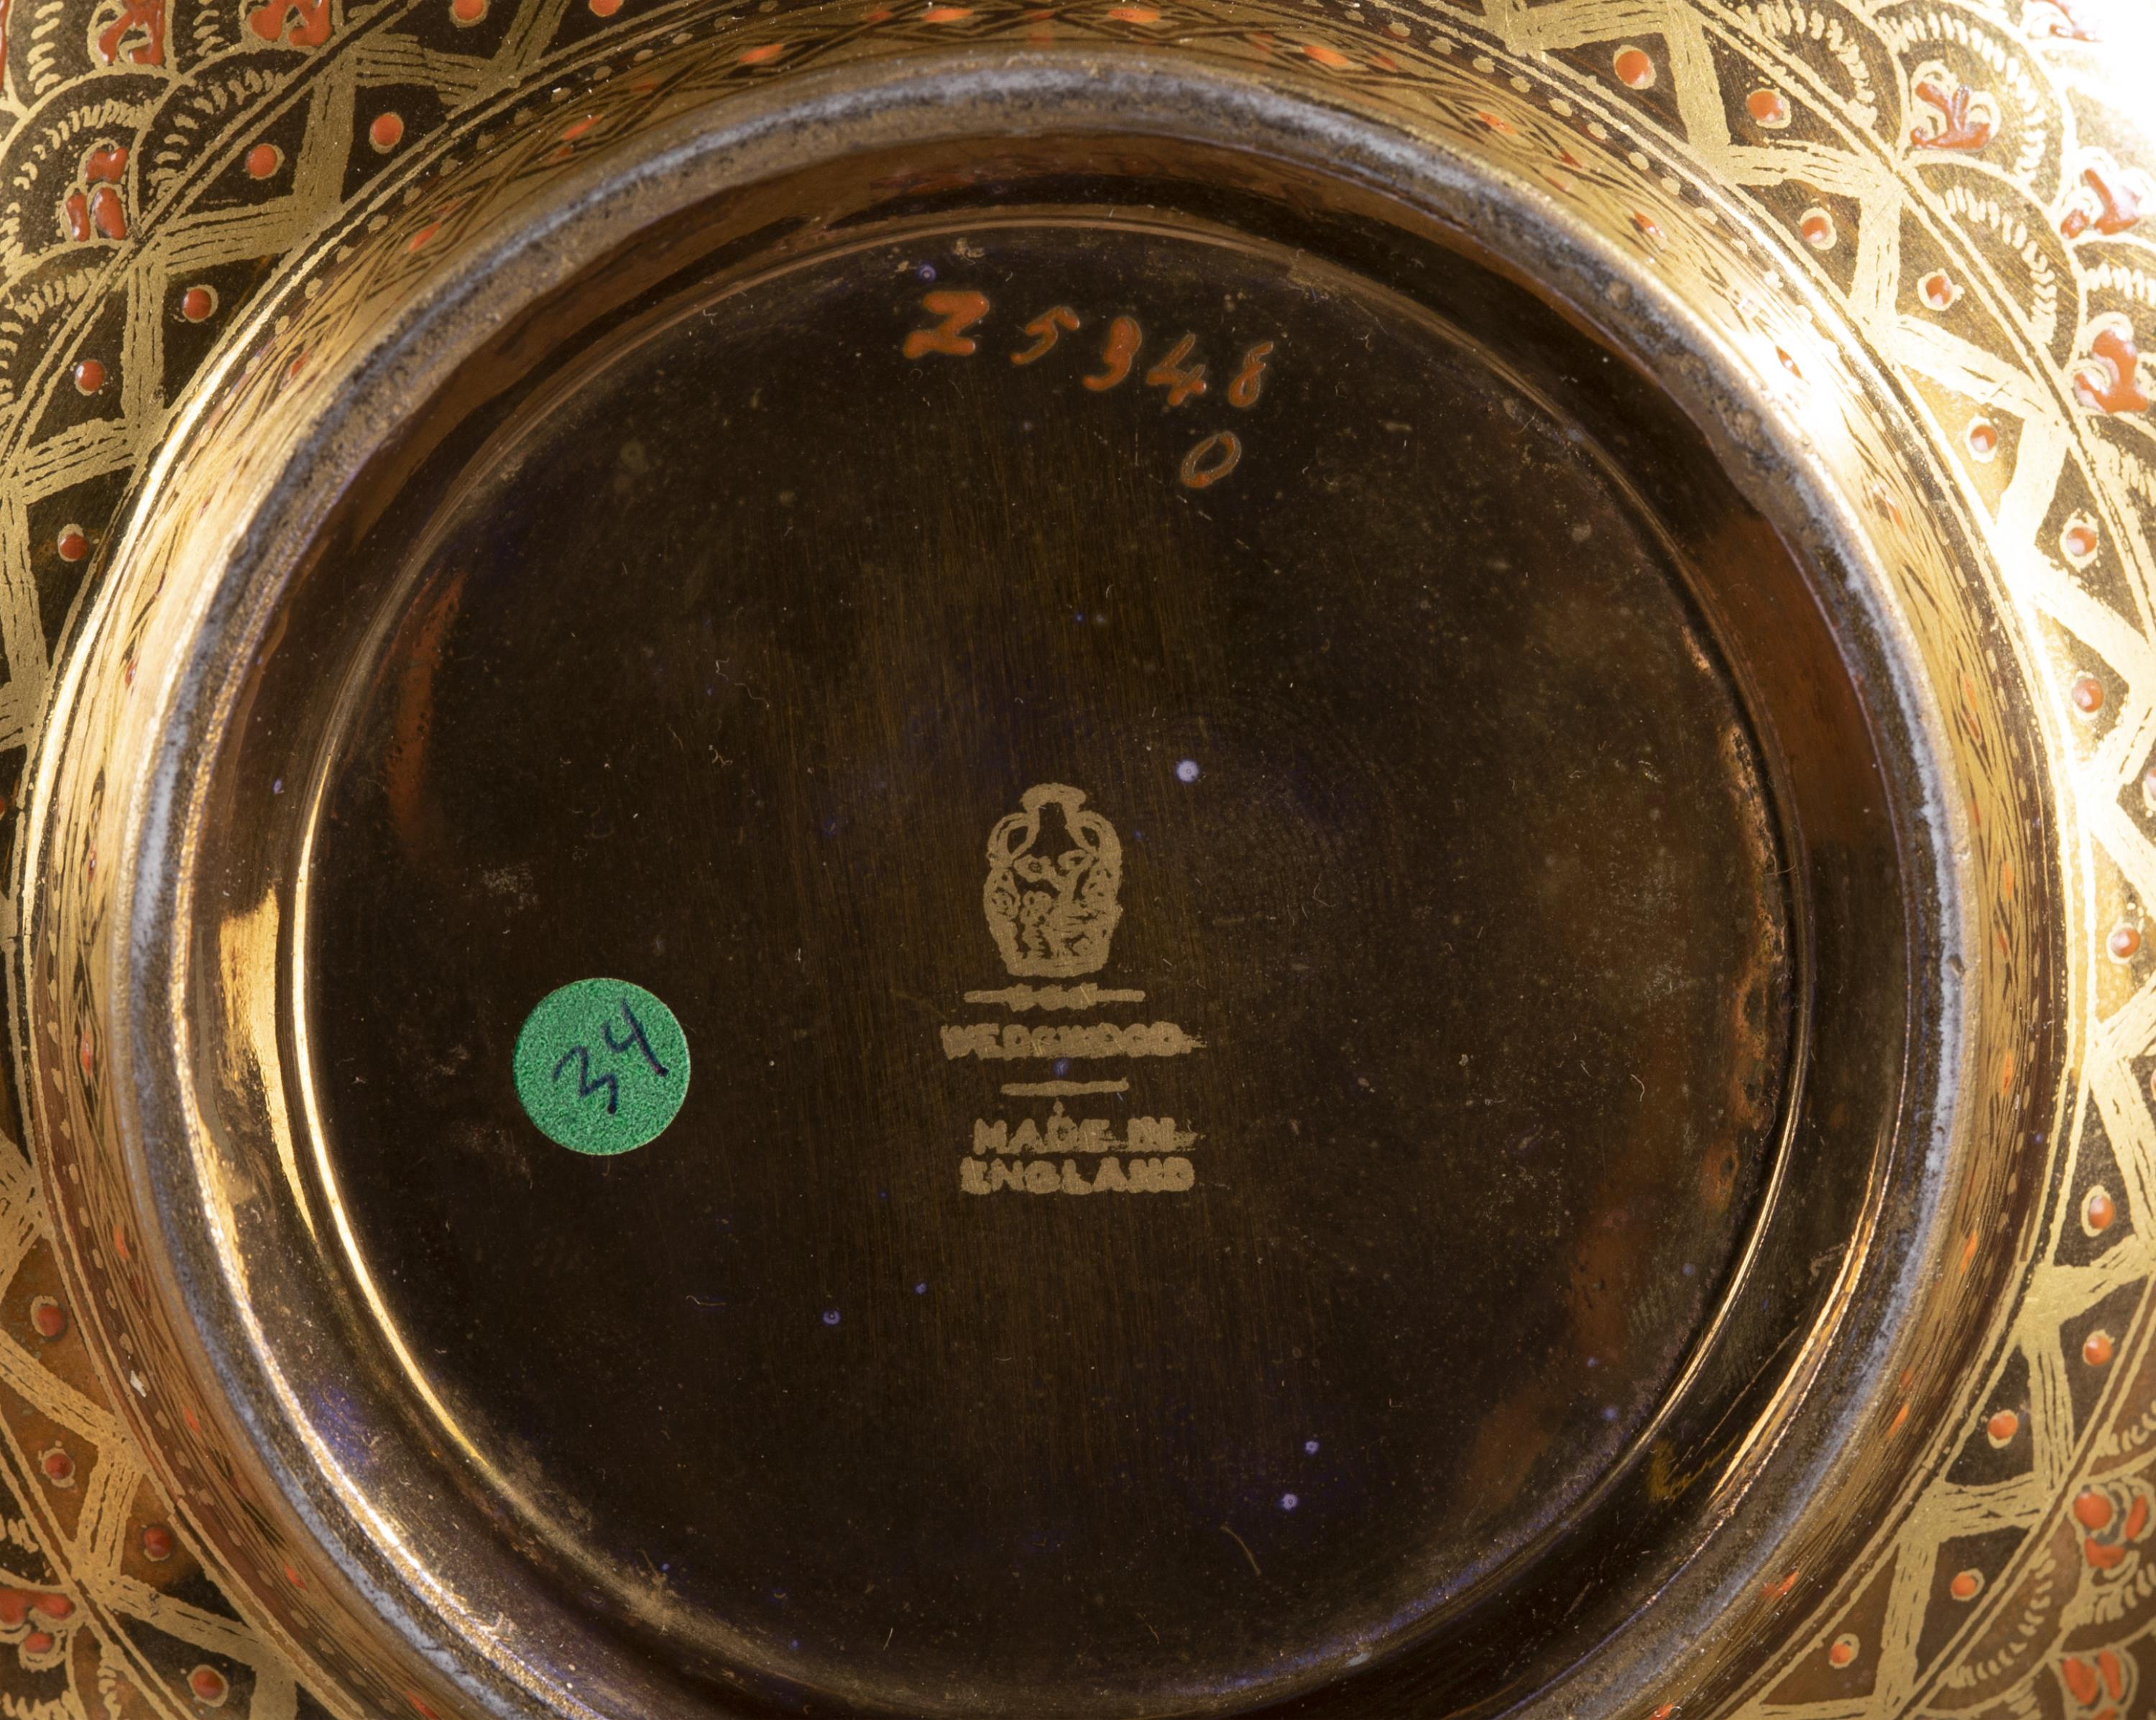 2 Wedgwood, Coral and Bronze, lustre bowls. - Image 7 of 8